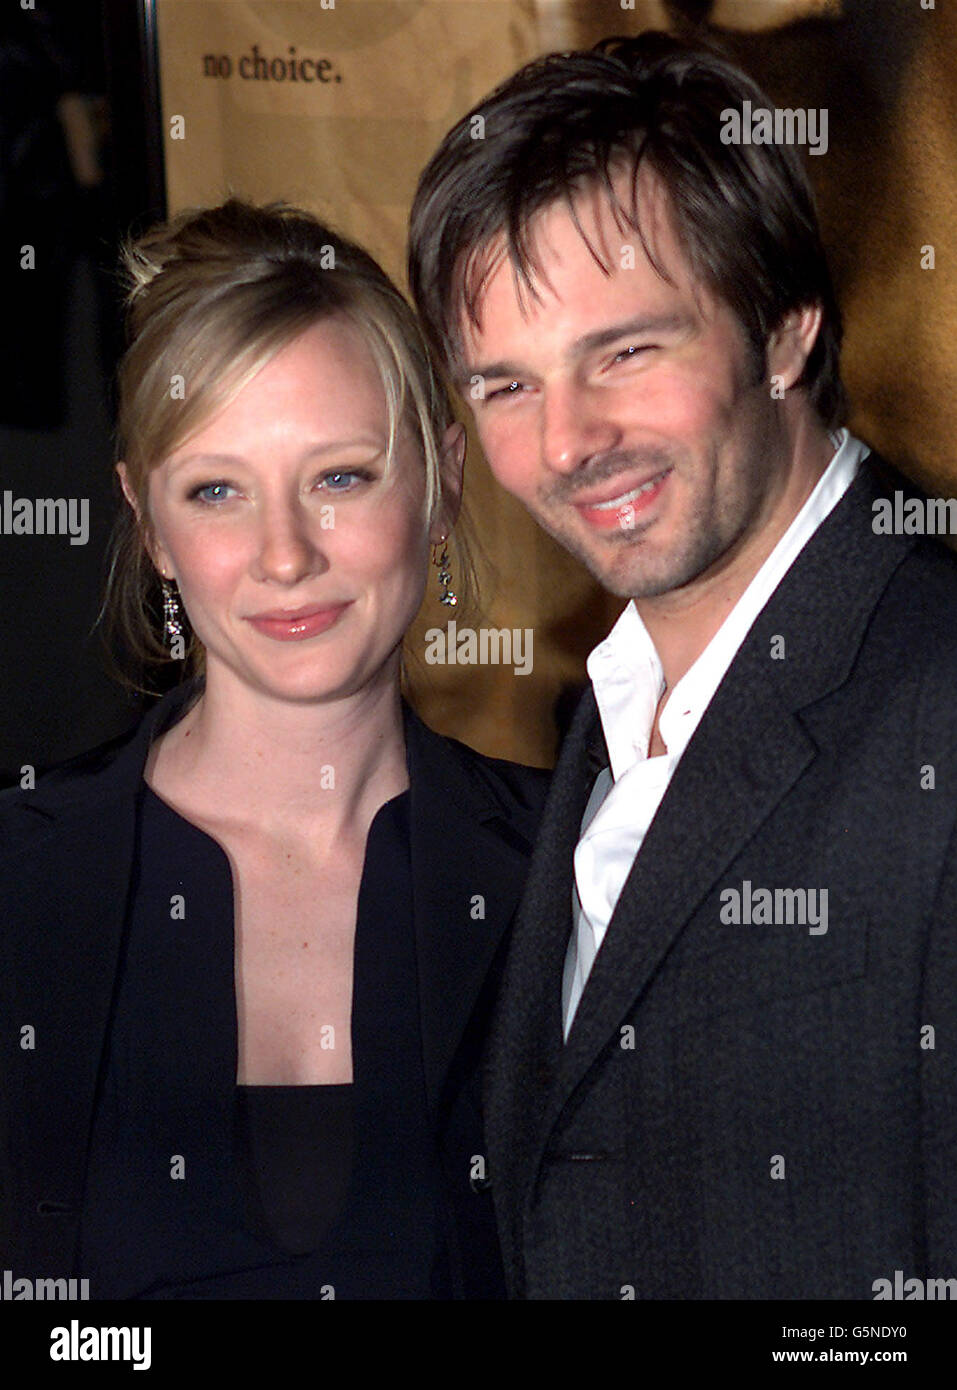 Pregnant actress Anne Heche with her husband Coley Laffoon arrives for the premiere of her new movie 'John Q' in Hollywood, California. Stock Photo